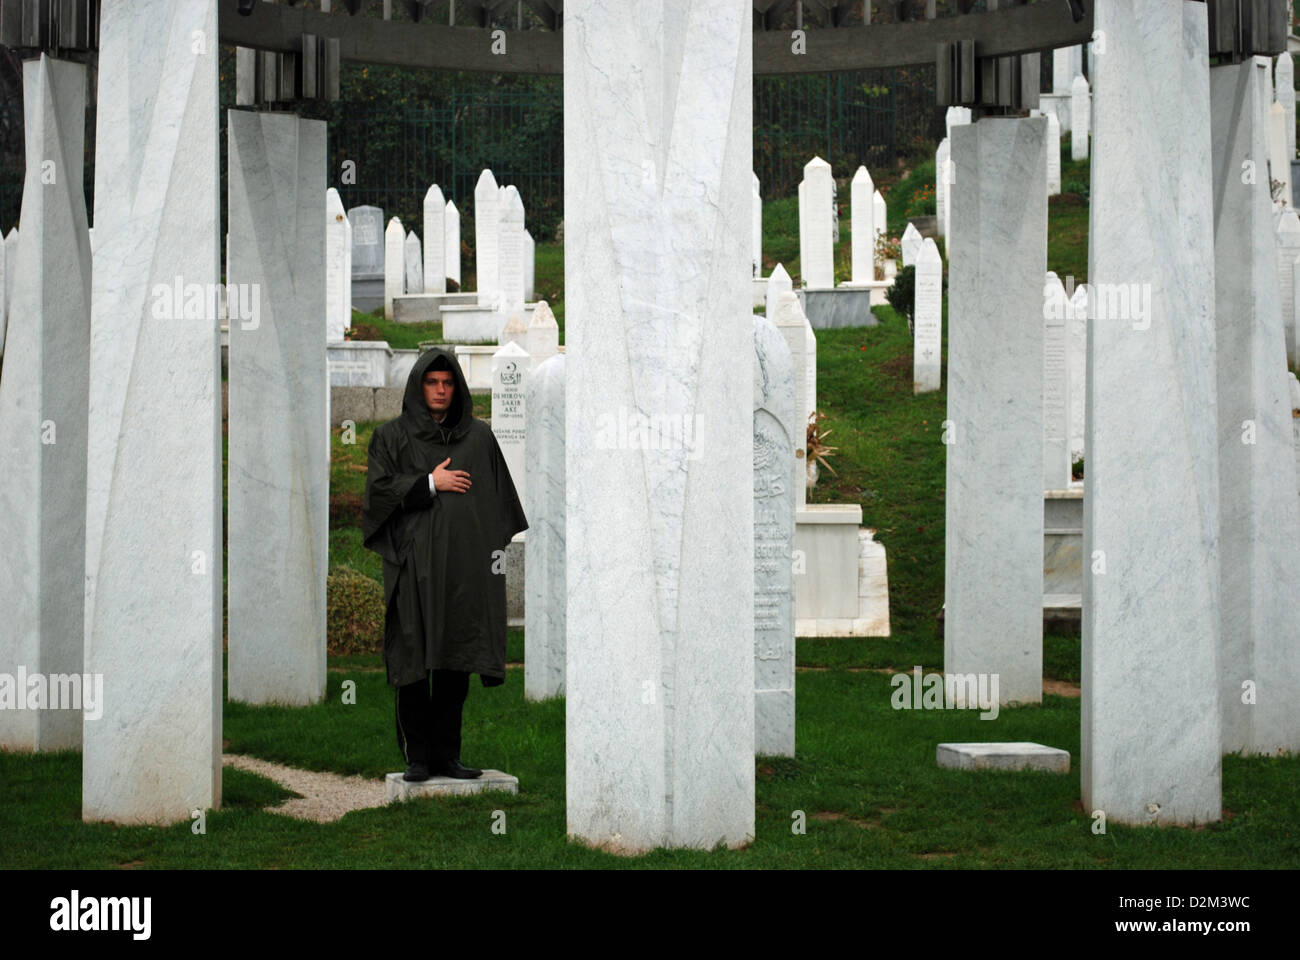 The grave of former Bosnian President Alija Izetbegović guarded by a soldier. The grave was damaged by a bomb attack in 2006. Stock Photo